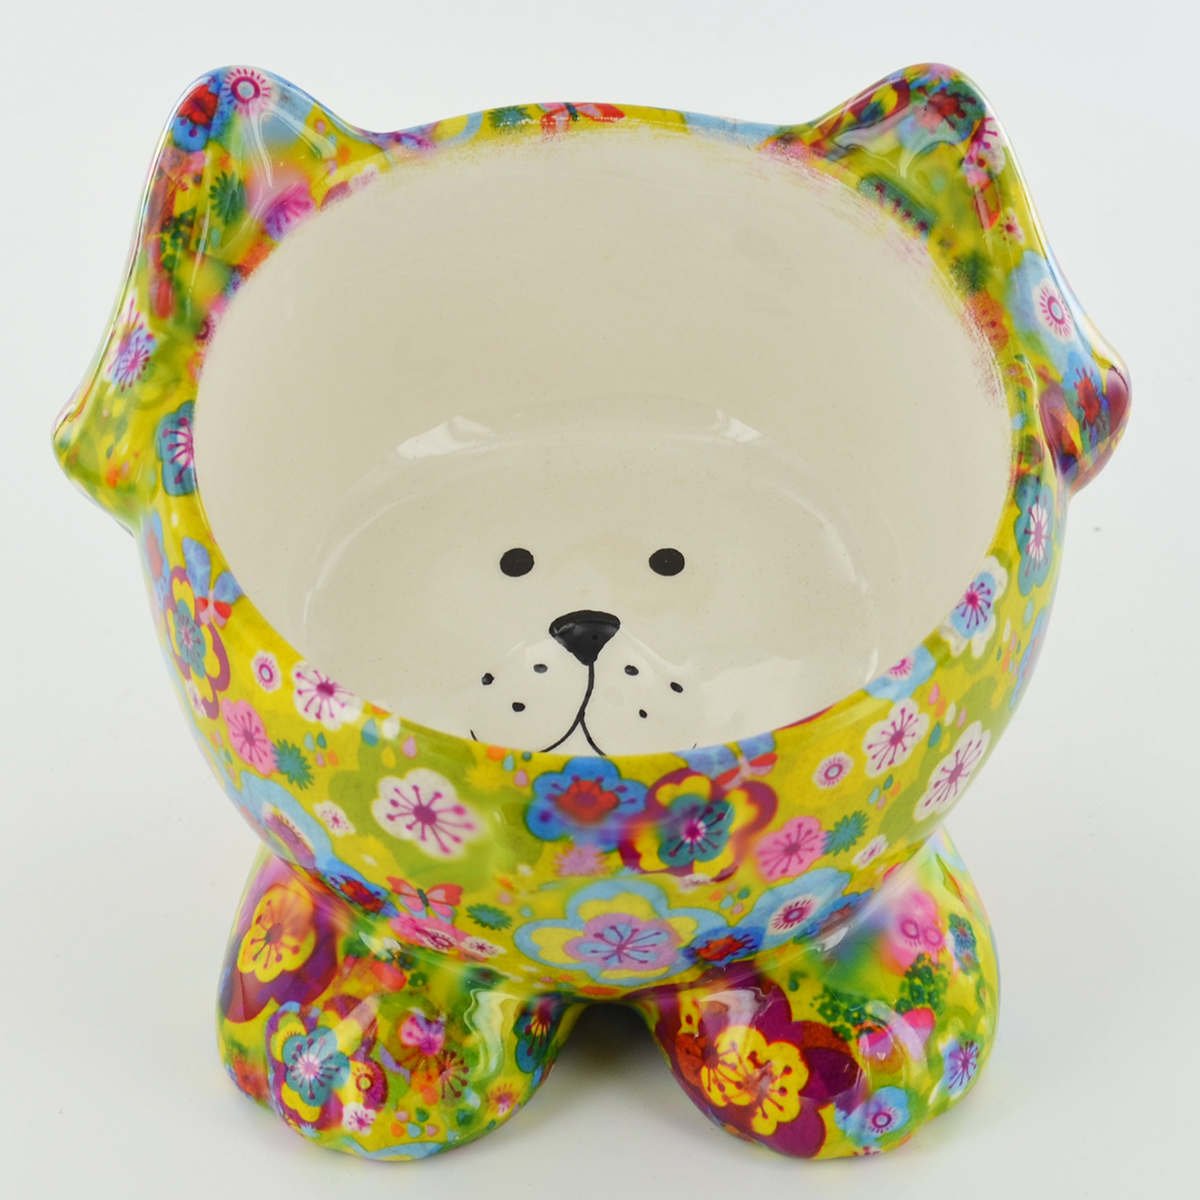 Pomme-Pidou Pet Bowls. New Collection. Gift, Home and Garden Wholesalers. Fiesta Studios. 